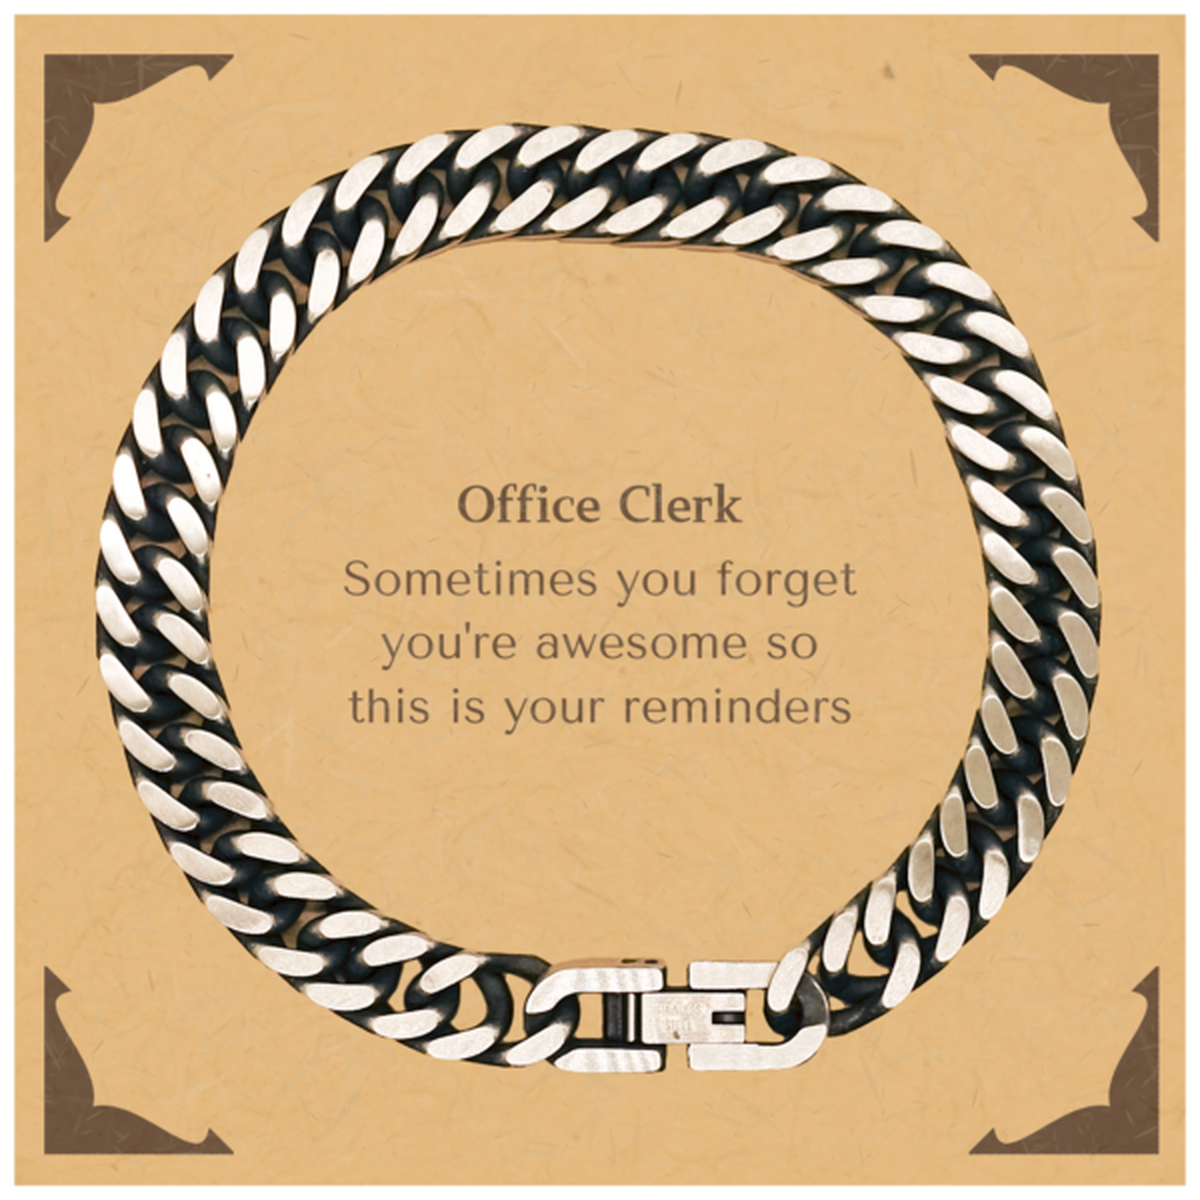 Sentimental Office Clerk Cuban Link Chain Bracelet, Office Clerk Sometimes you forget you're awesome so this is your reminders, Graduation Christmas Birthday Gifts for Office Clerk, Men, Women, Coworkers